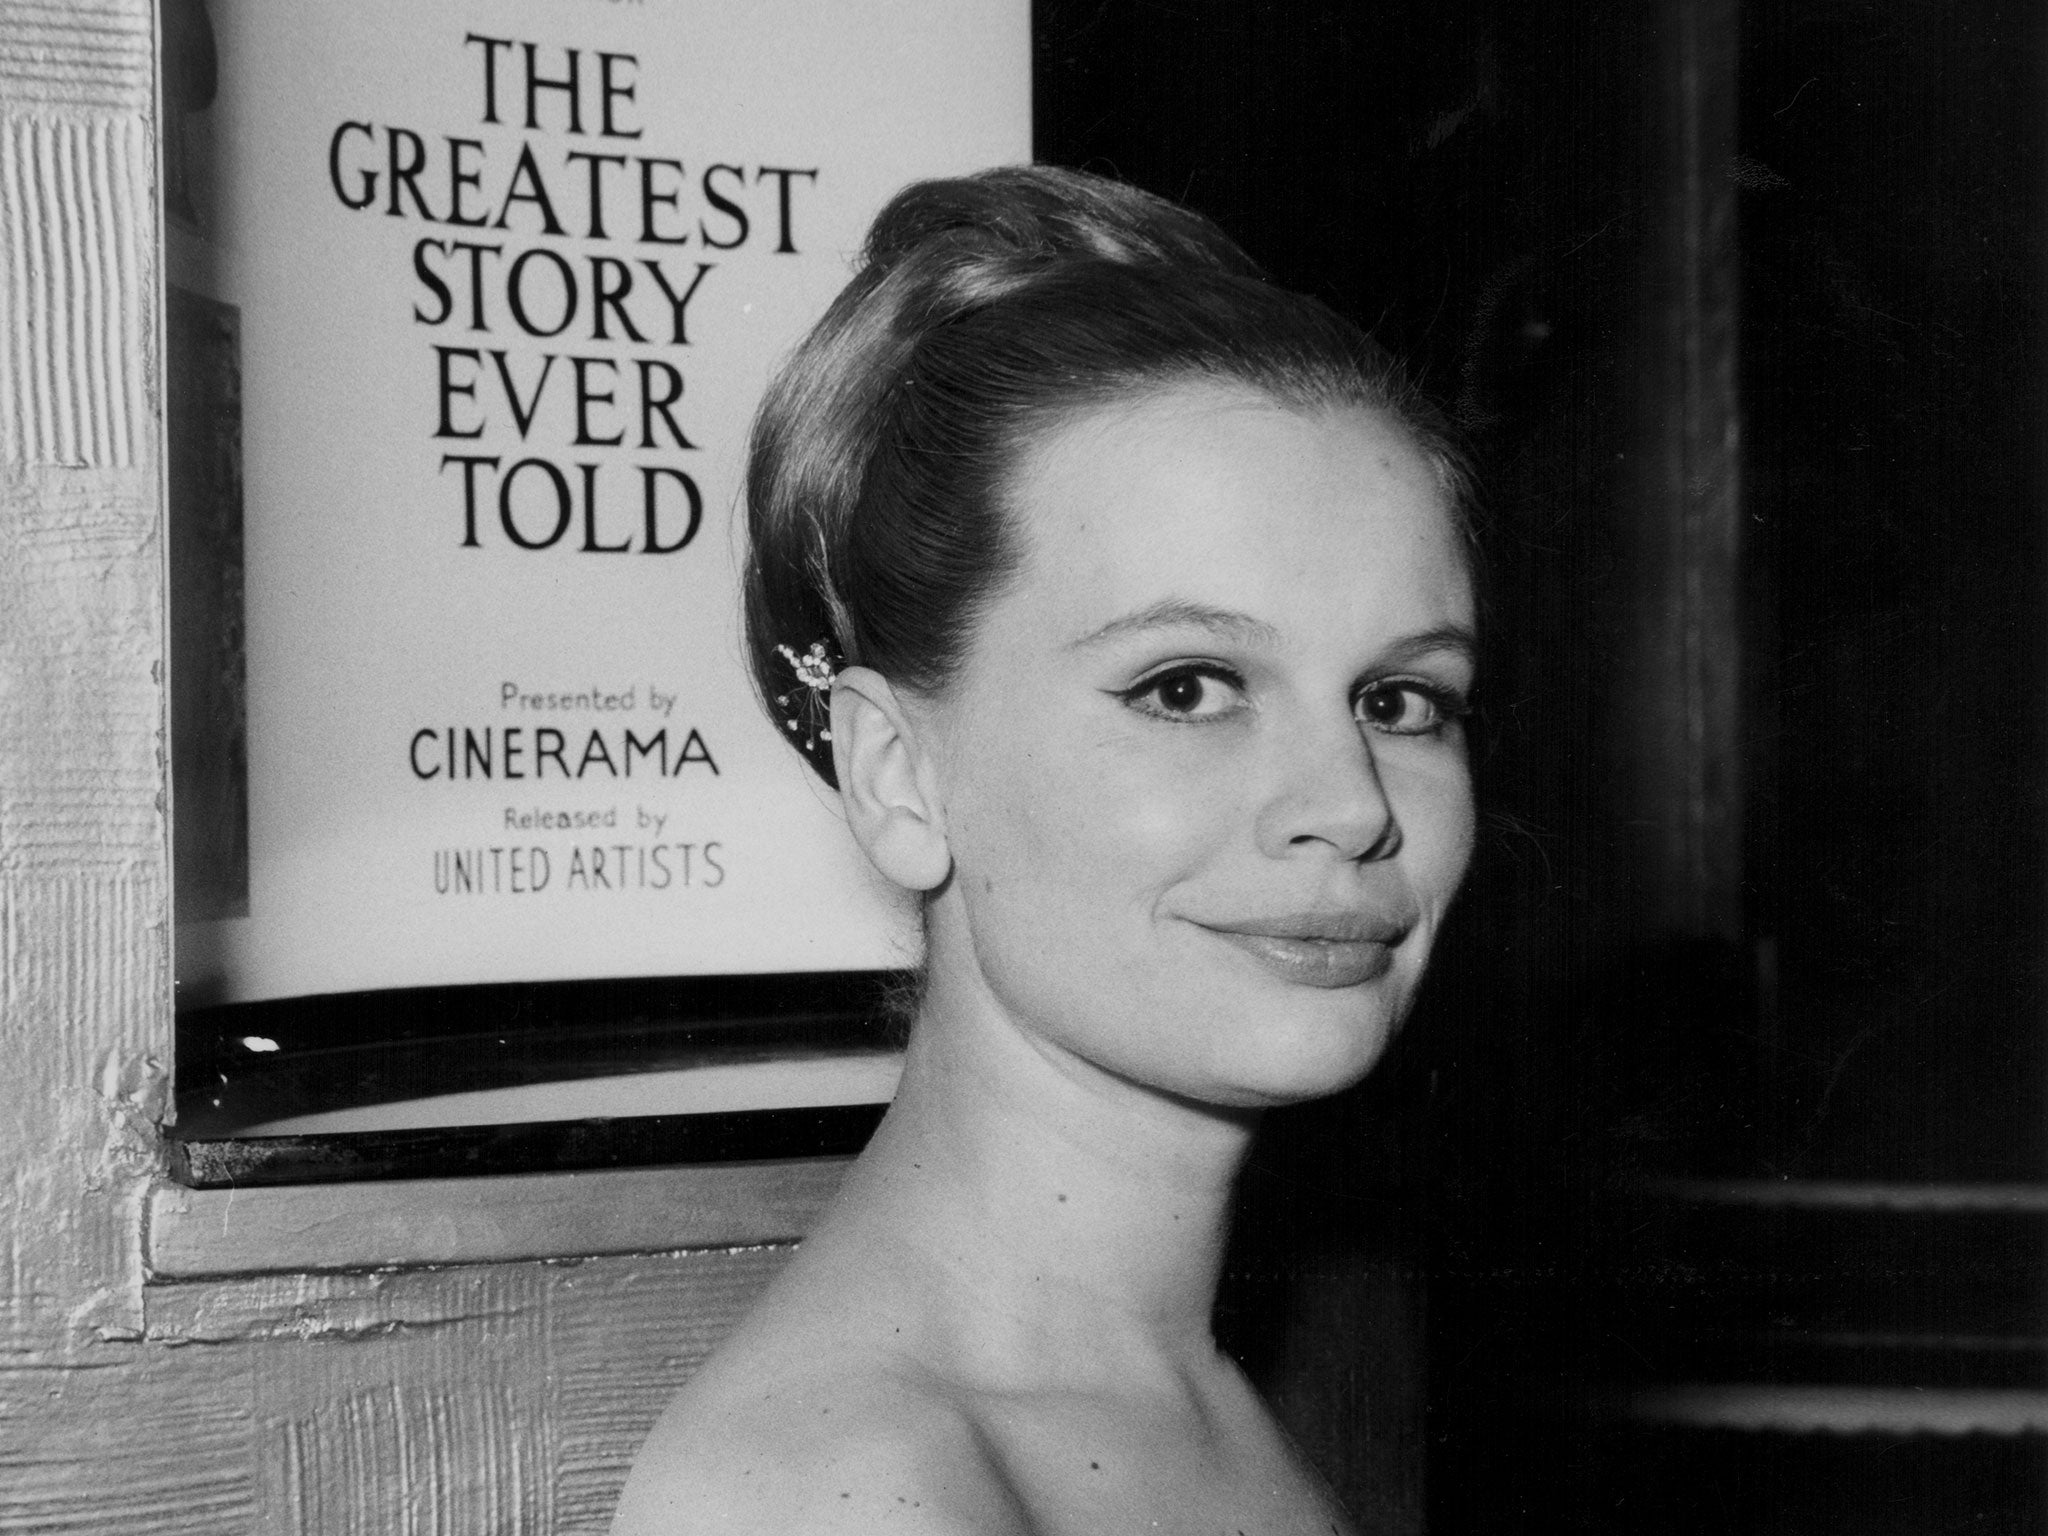 Dunham in 1965 at the Casino Cinerama Theatre in Soho for the European premiere of her best-known film